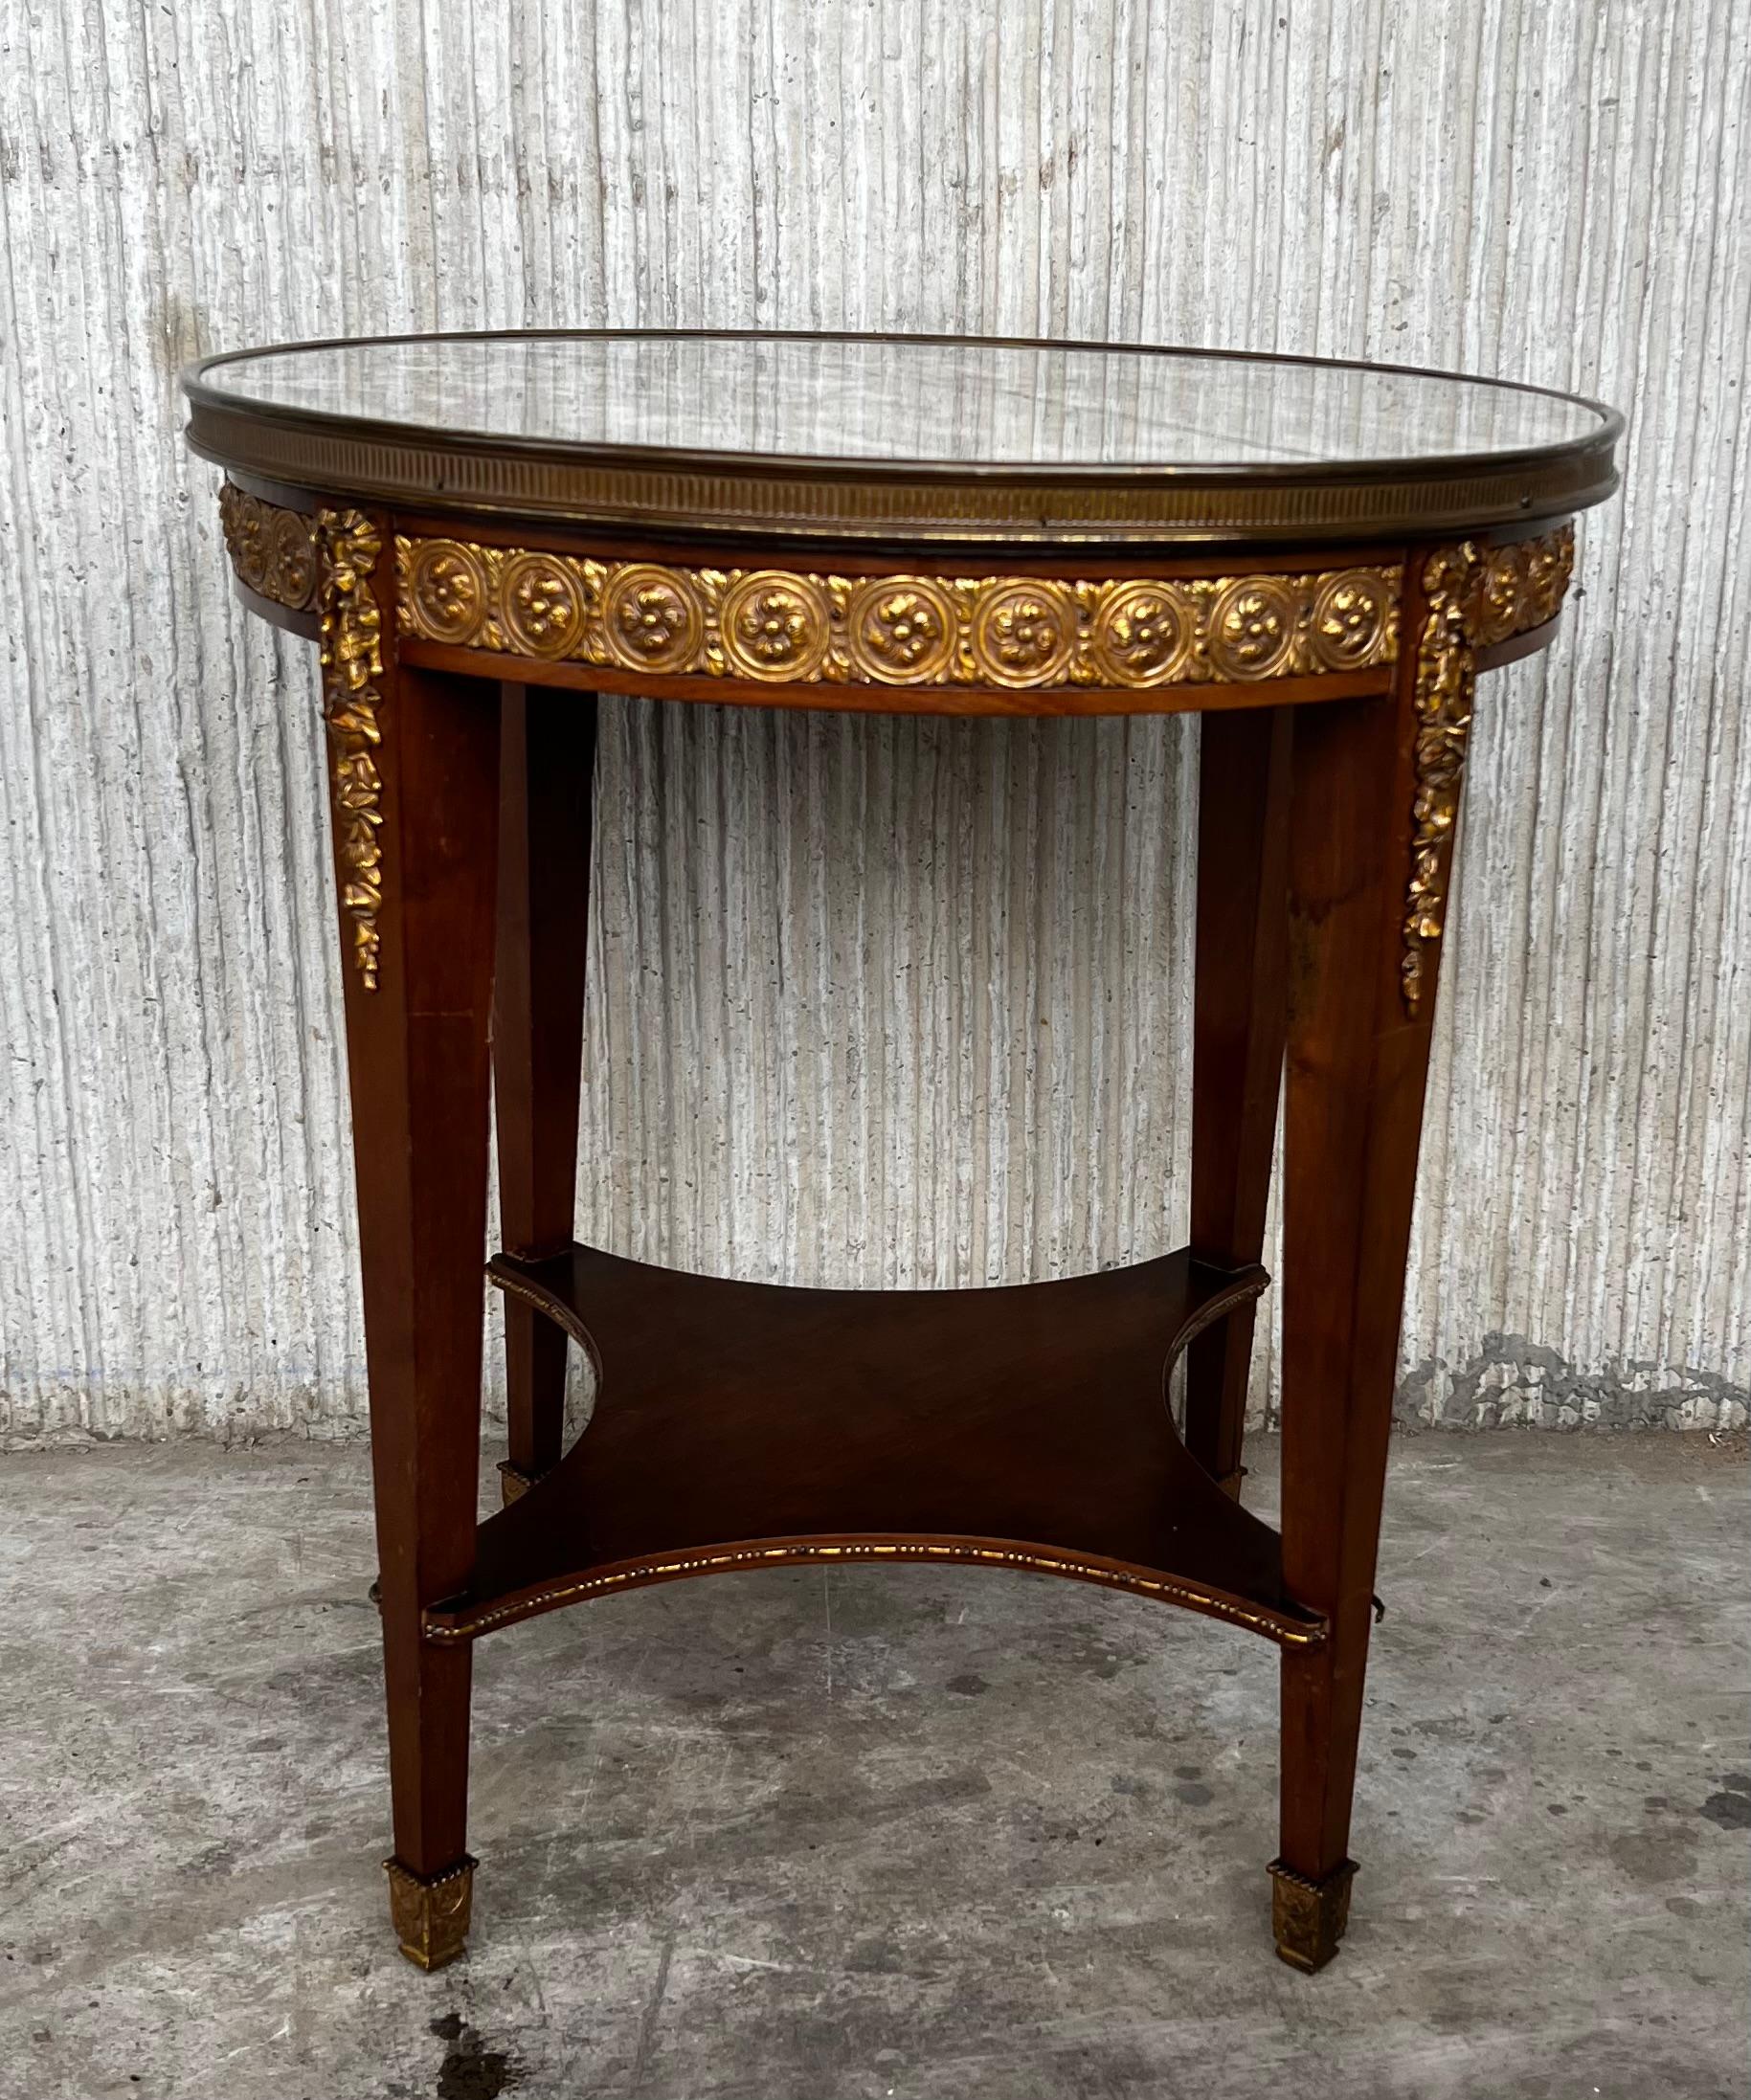 20th century Louis XVI style with bronze and round marble French oak wood table.

Solid oak with partial veneer and finely engraved bronze fixtures.